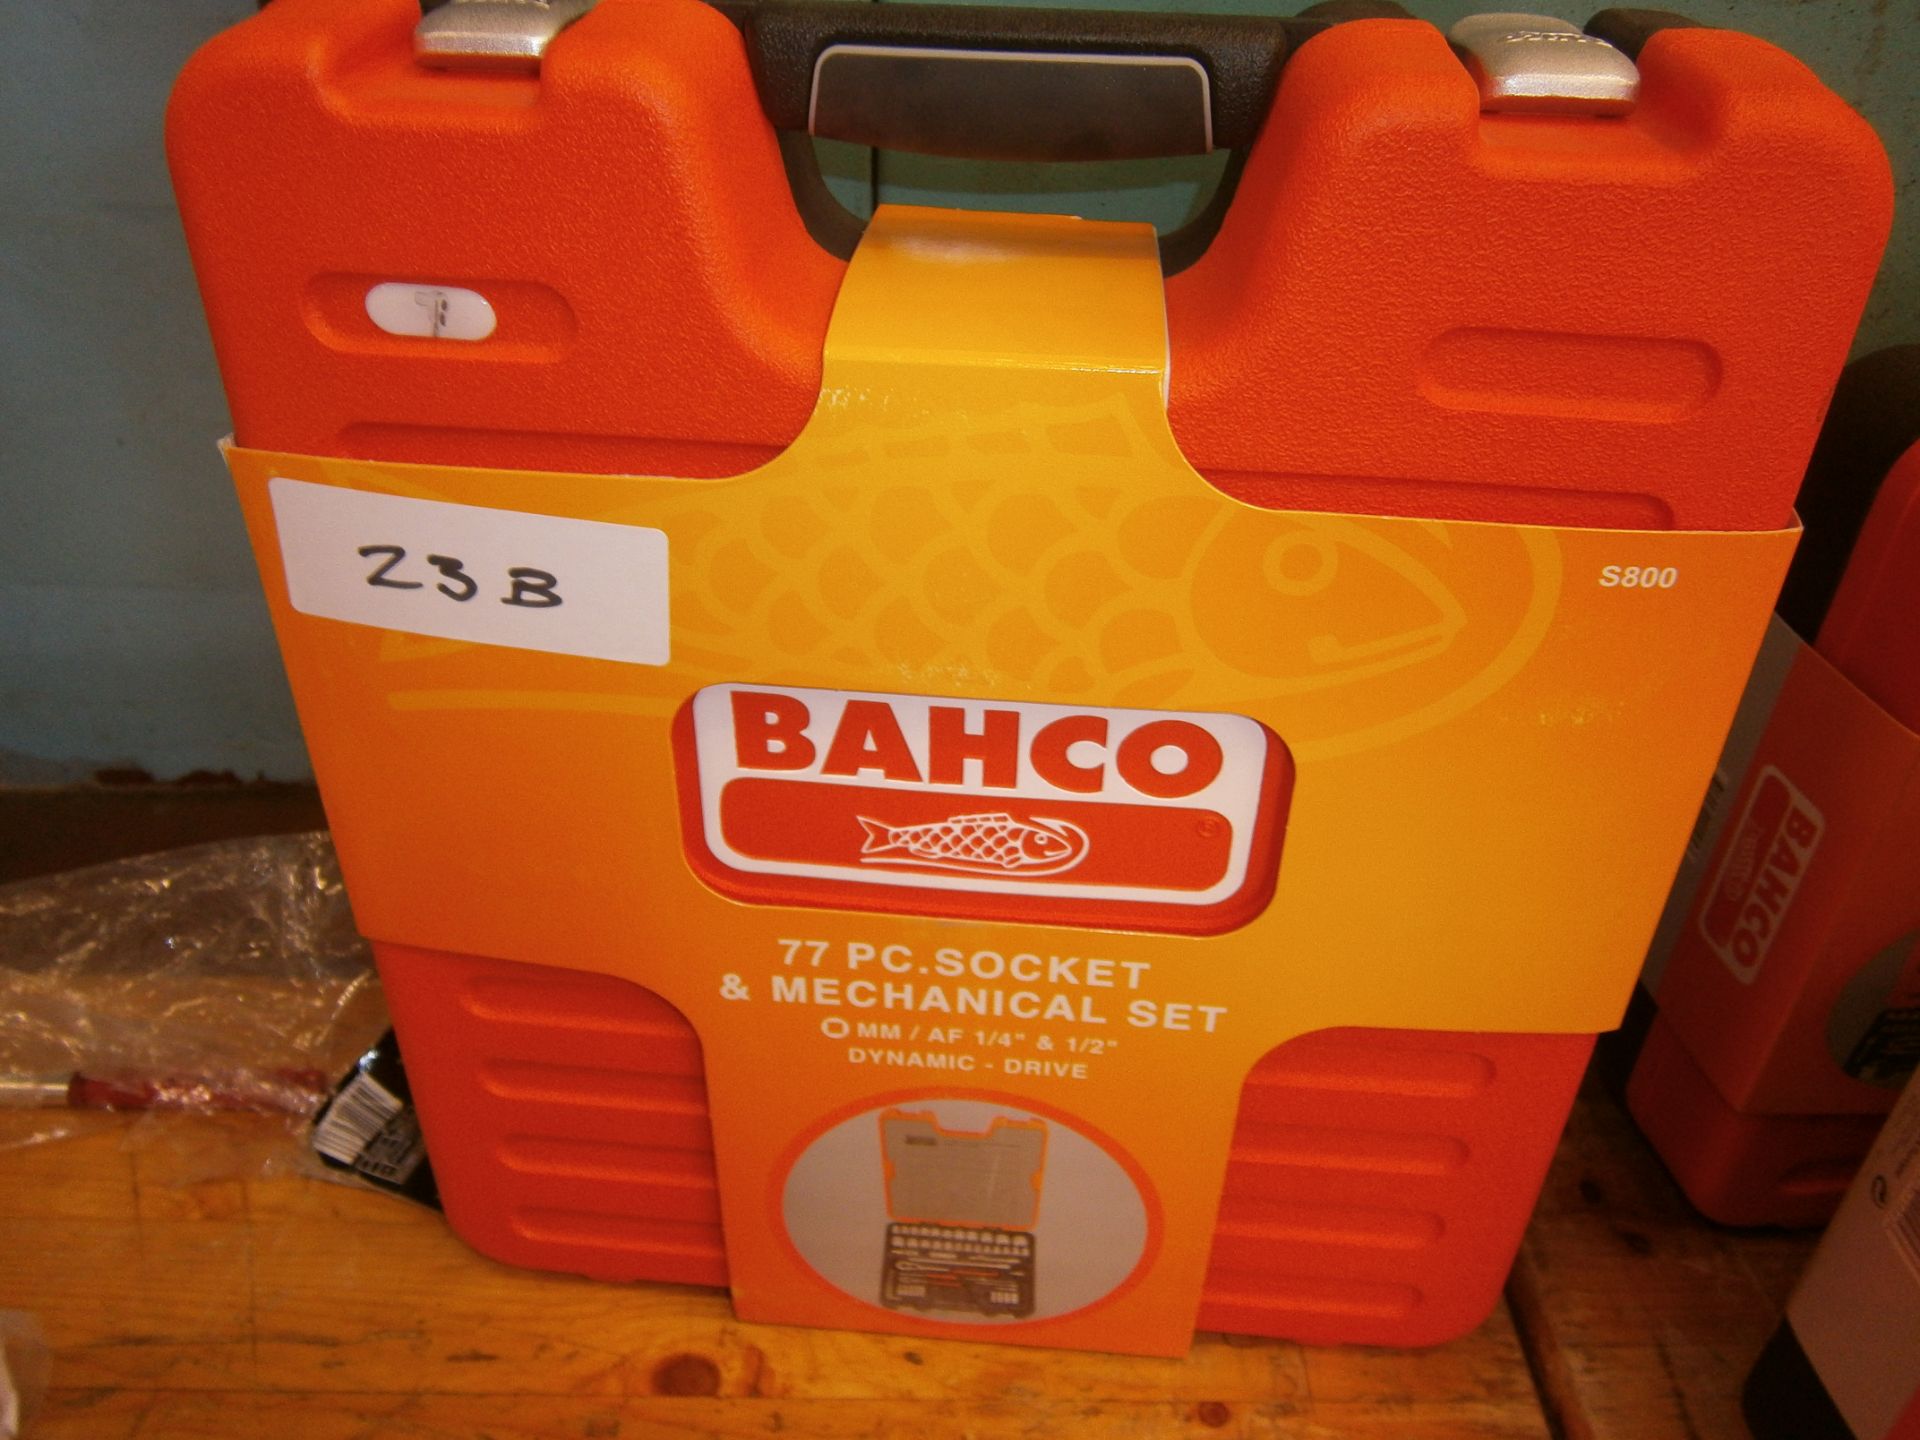 Bahco 77 Piece Socket And Mechanical Set